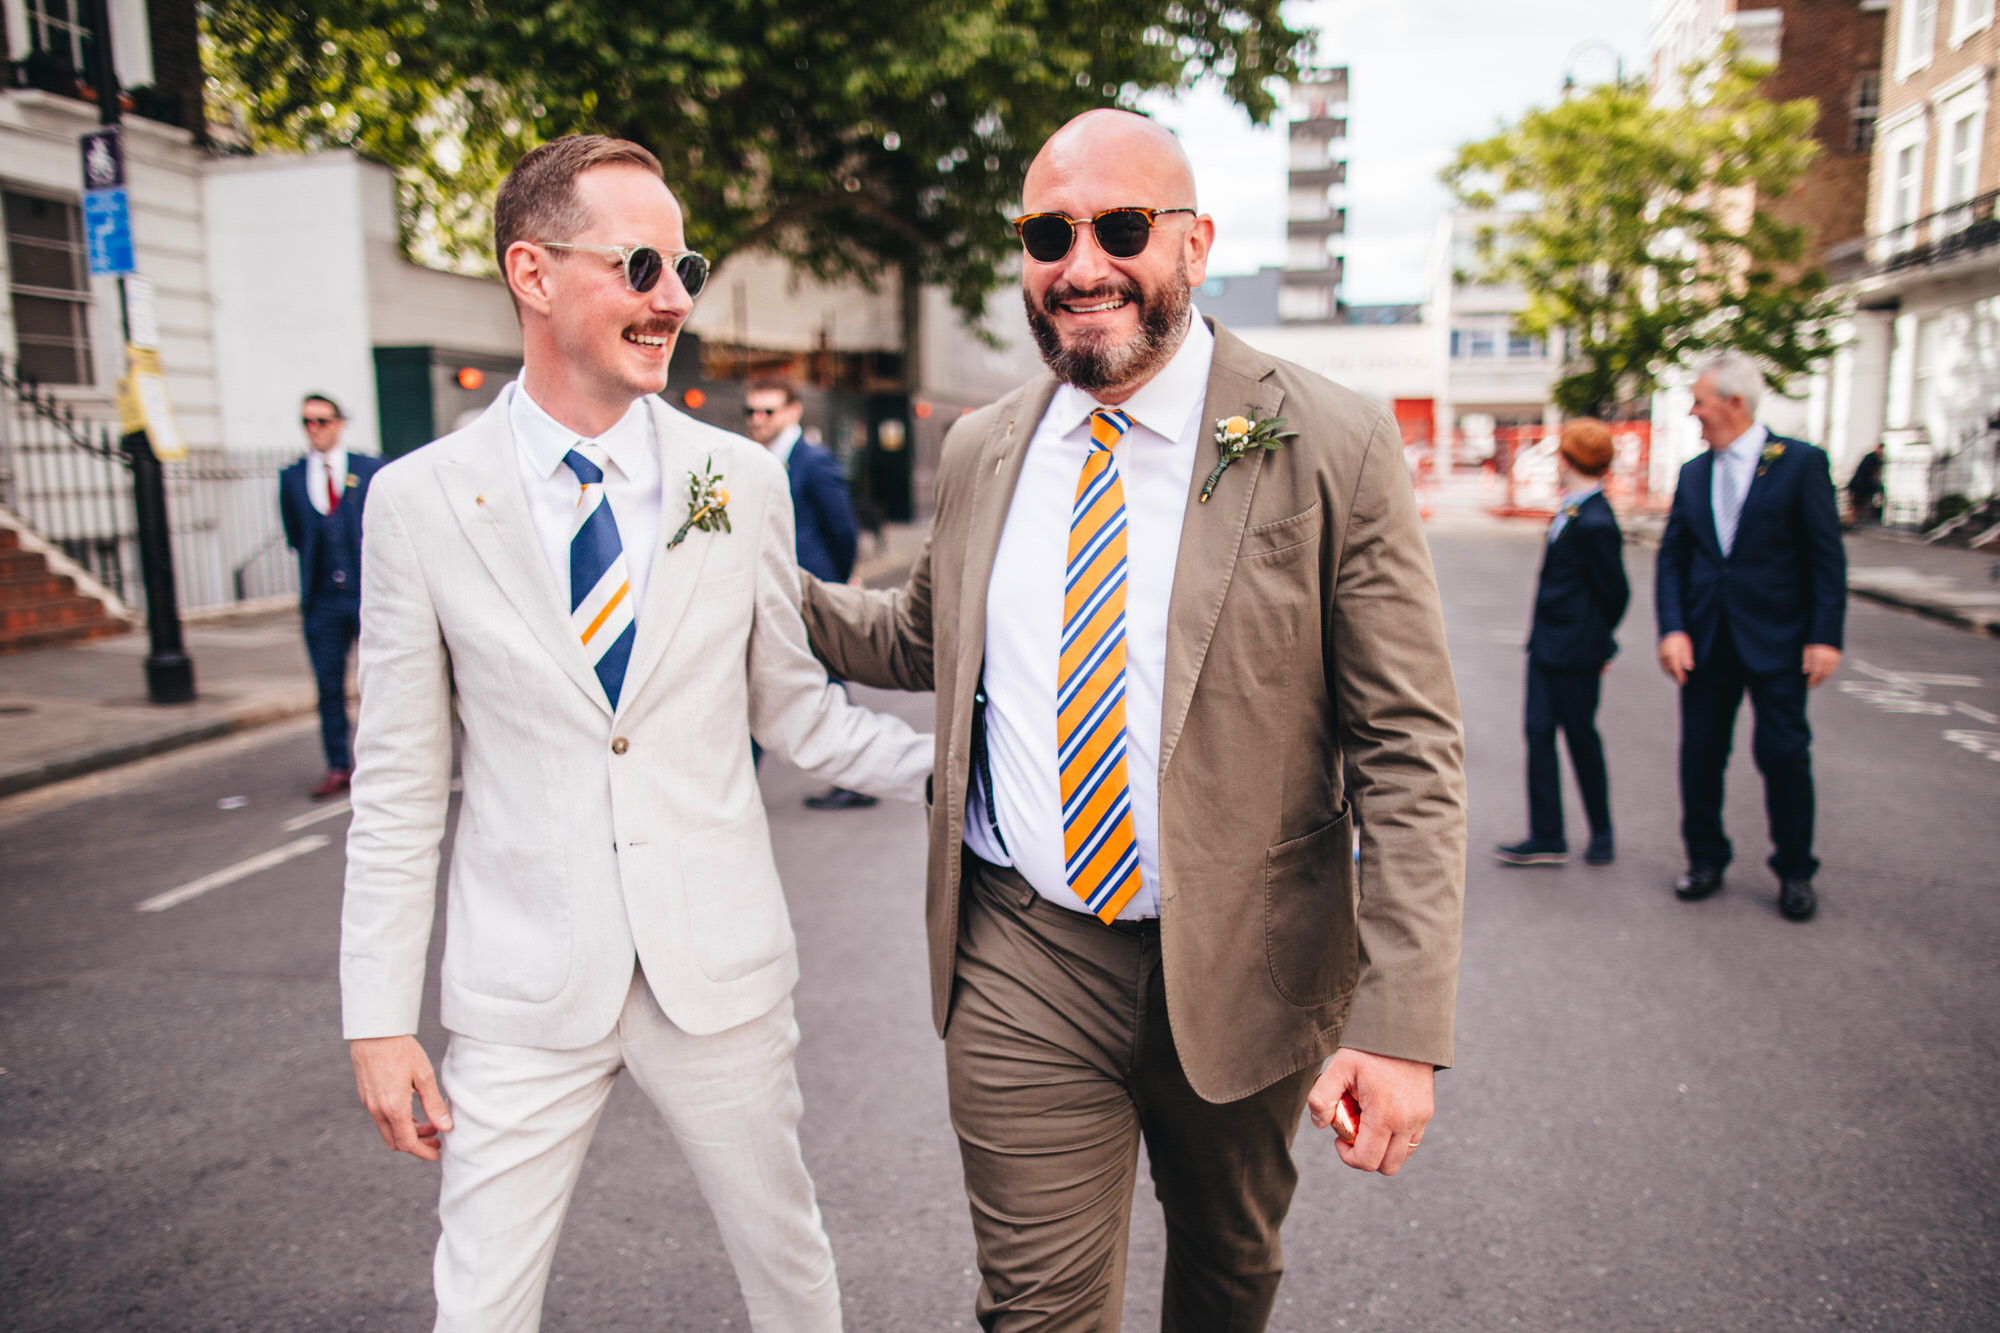 grooms walking together in wedding suits at London wedding, Chelsea wedding